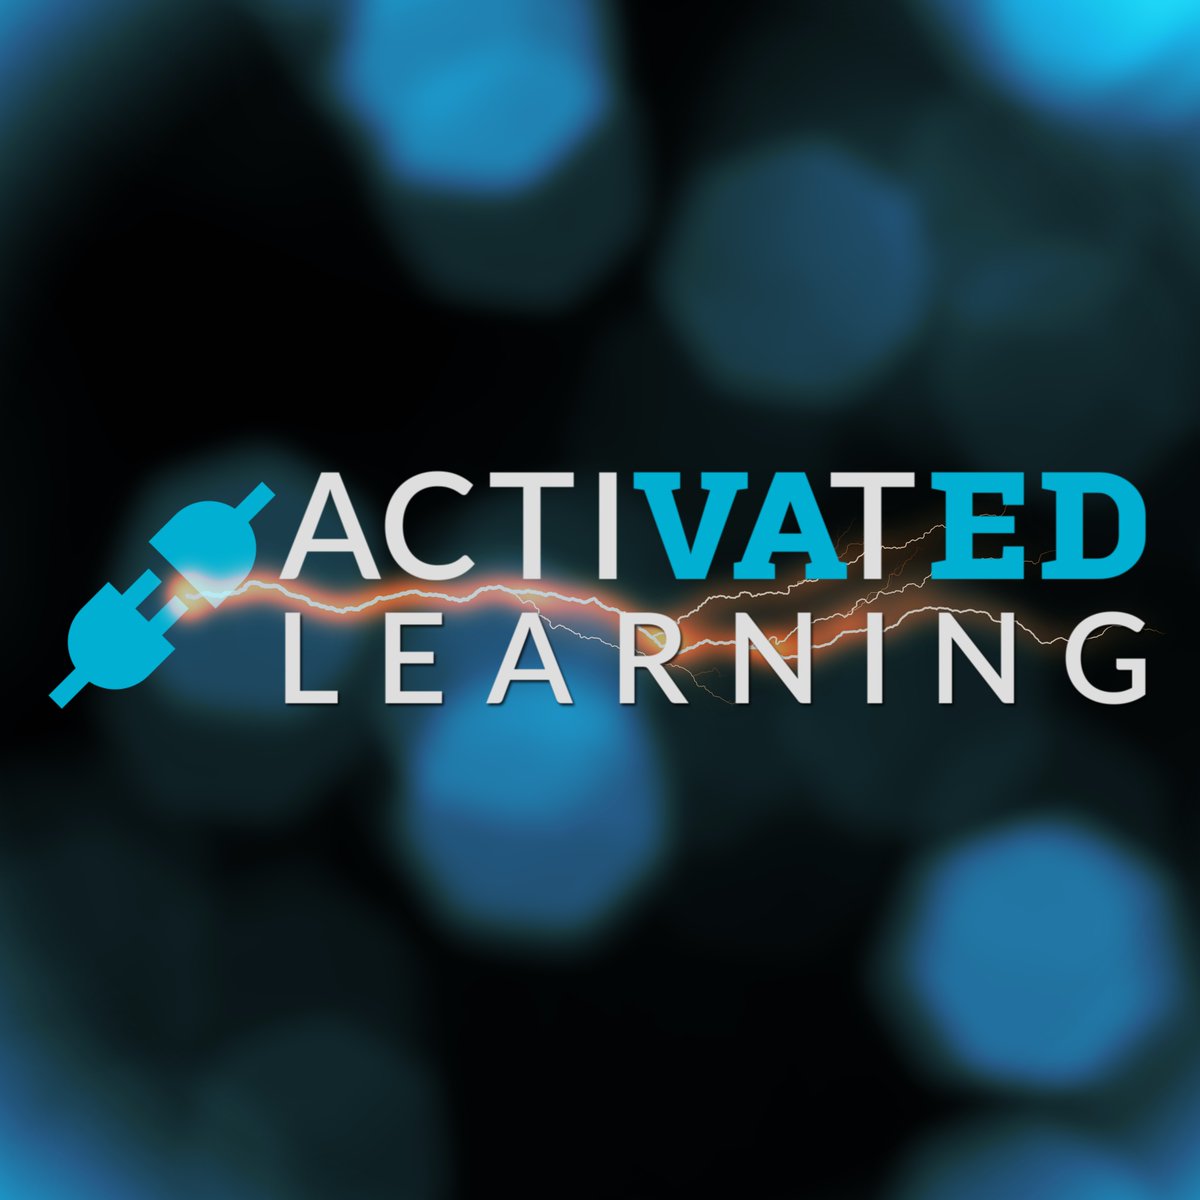 Have you listened and subscribed to the #ActiVAtEDLearningPodcast It is dedicated to exploring innovative strategies & tools for activating students' potential and engagement in the digital age. activatedlearningpodcast.com #VSTE #BlueRidgePBS @VSTE #edtech #VCC